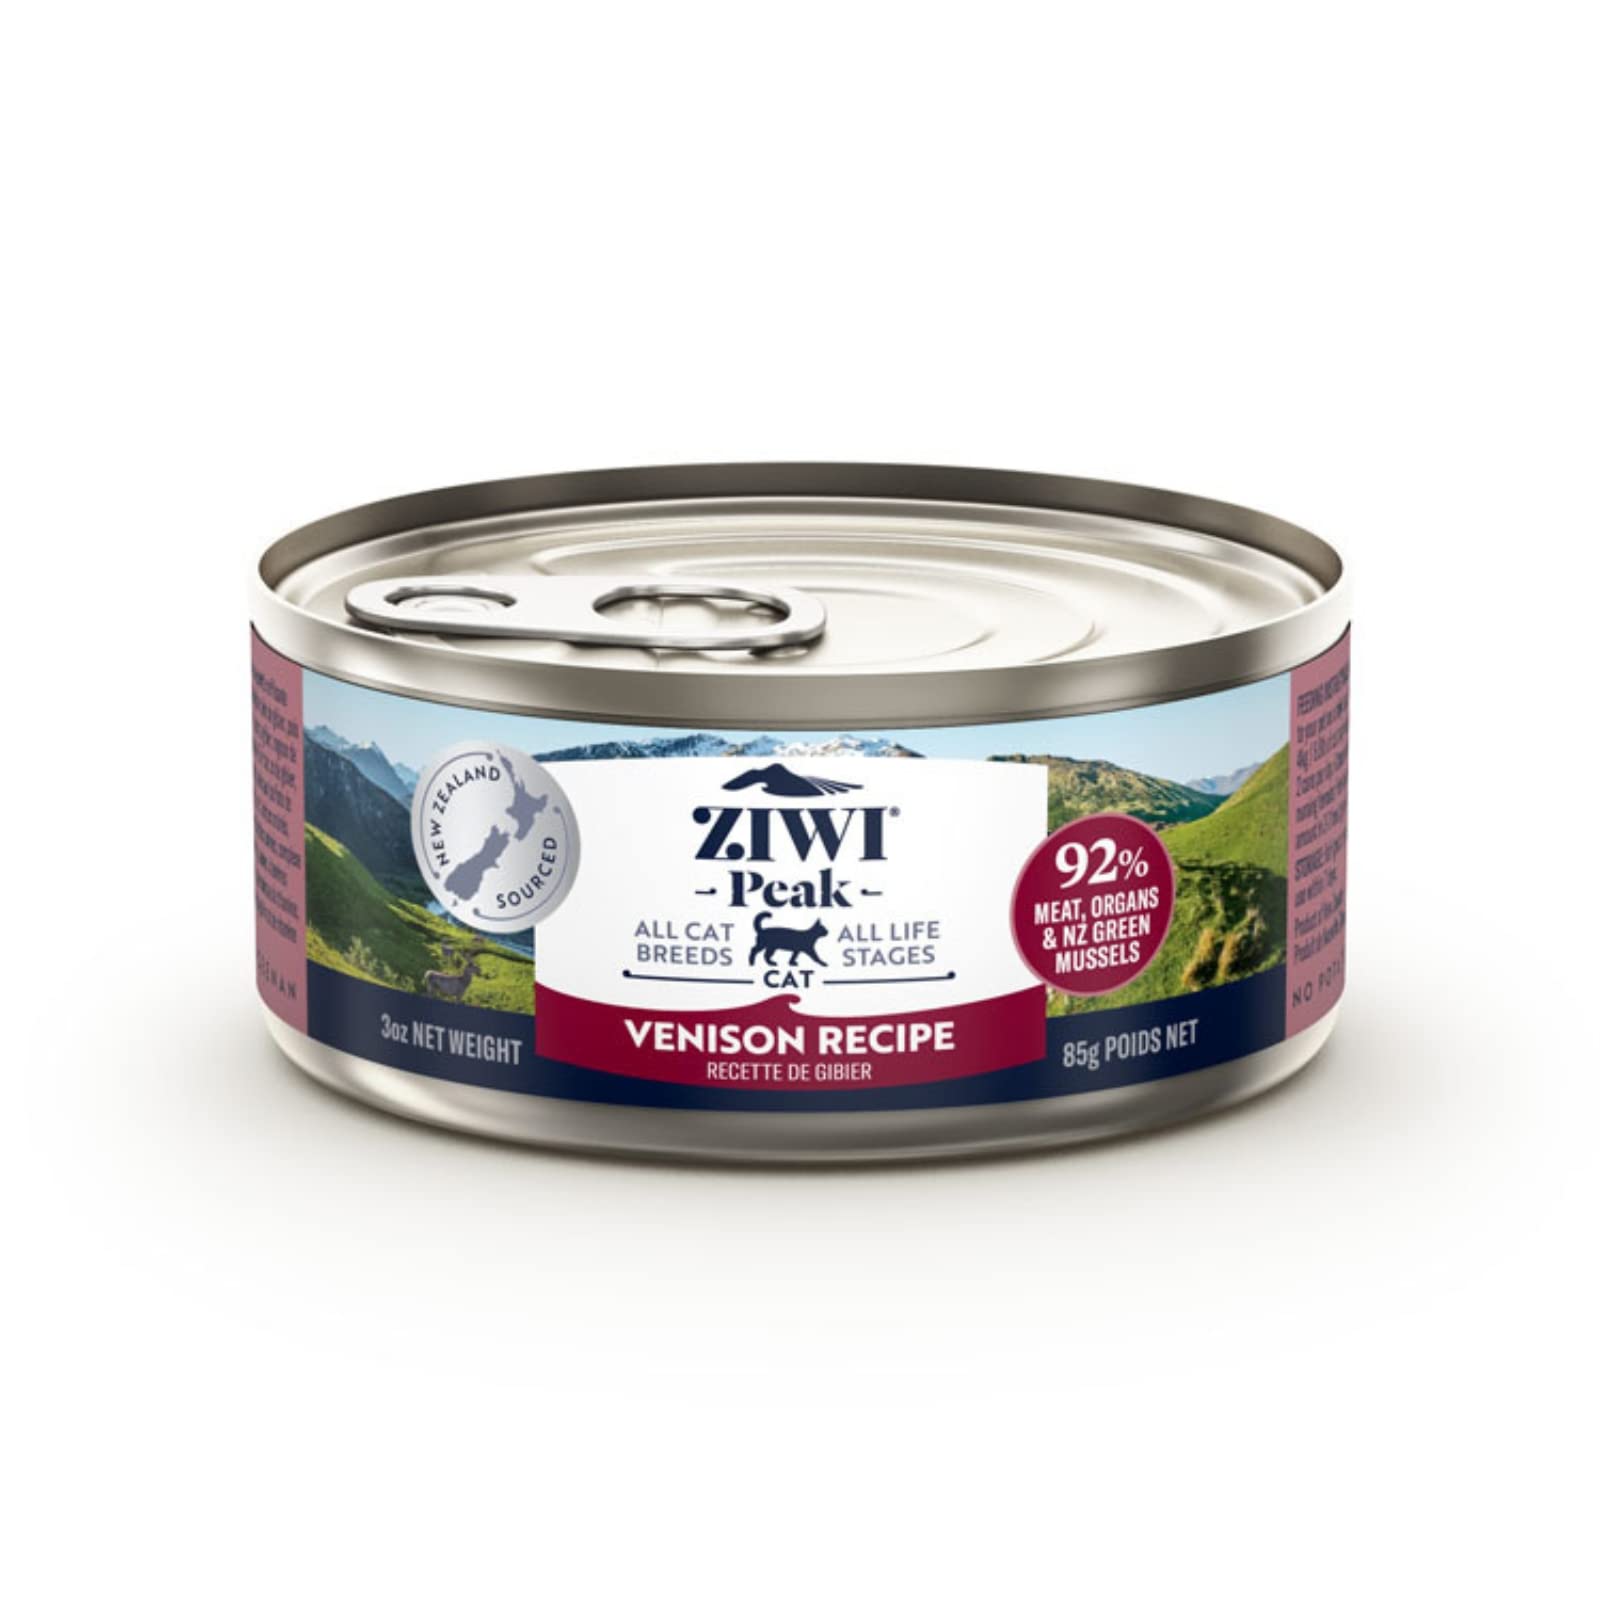 ZIWI Peak Canned Wet Cat Food – All Natural, High Protein, Grain Free, Limited Ingredient, with Superfoods (Venison, Case of 24, 3oz Cans)